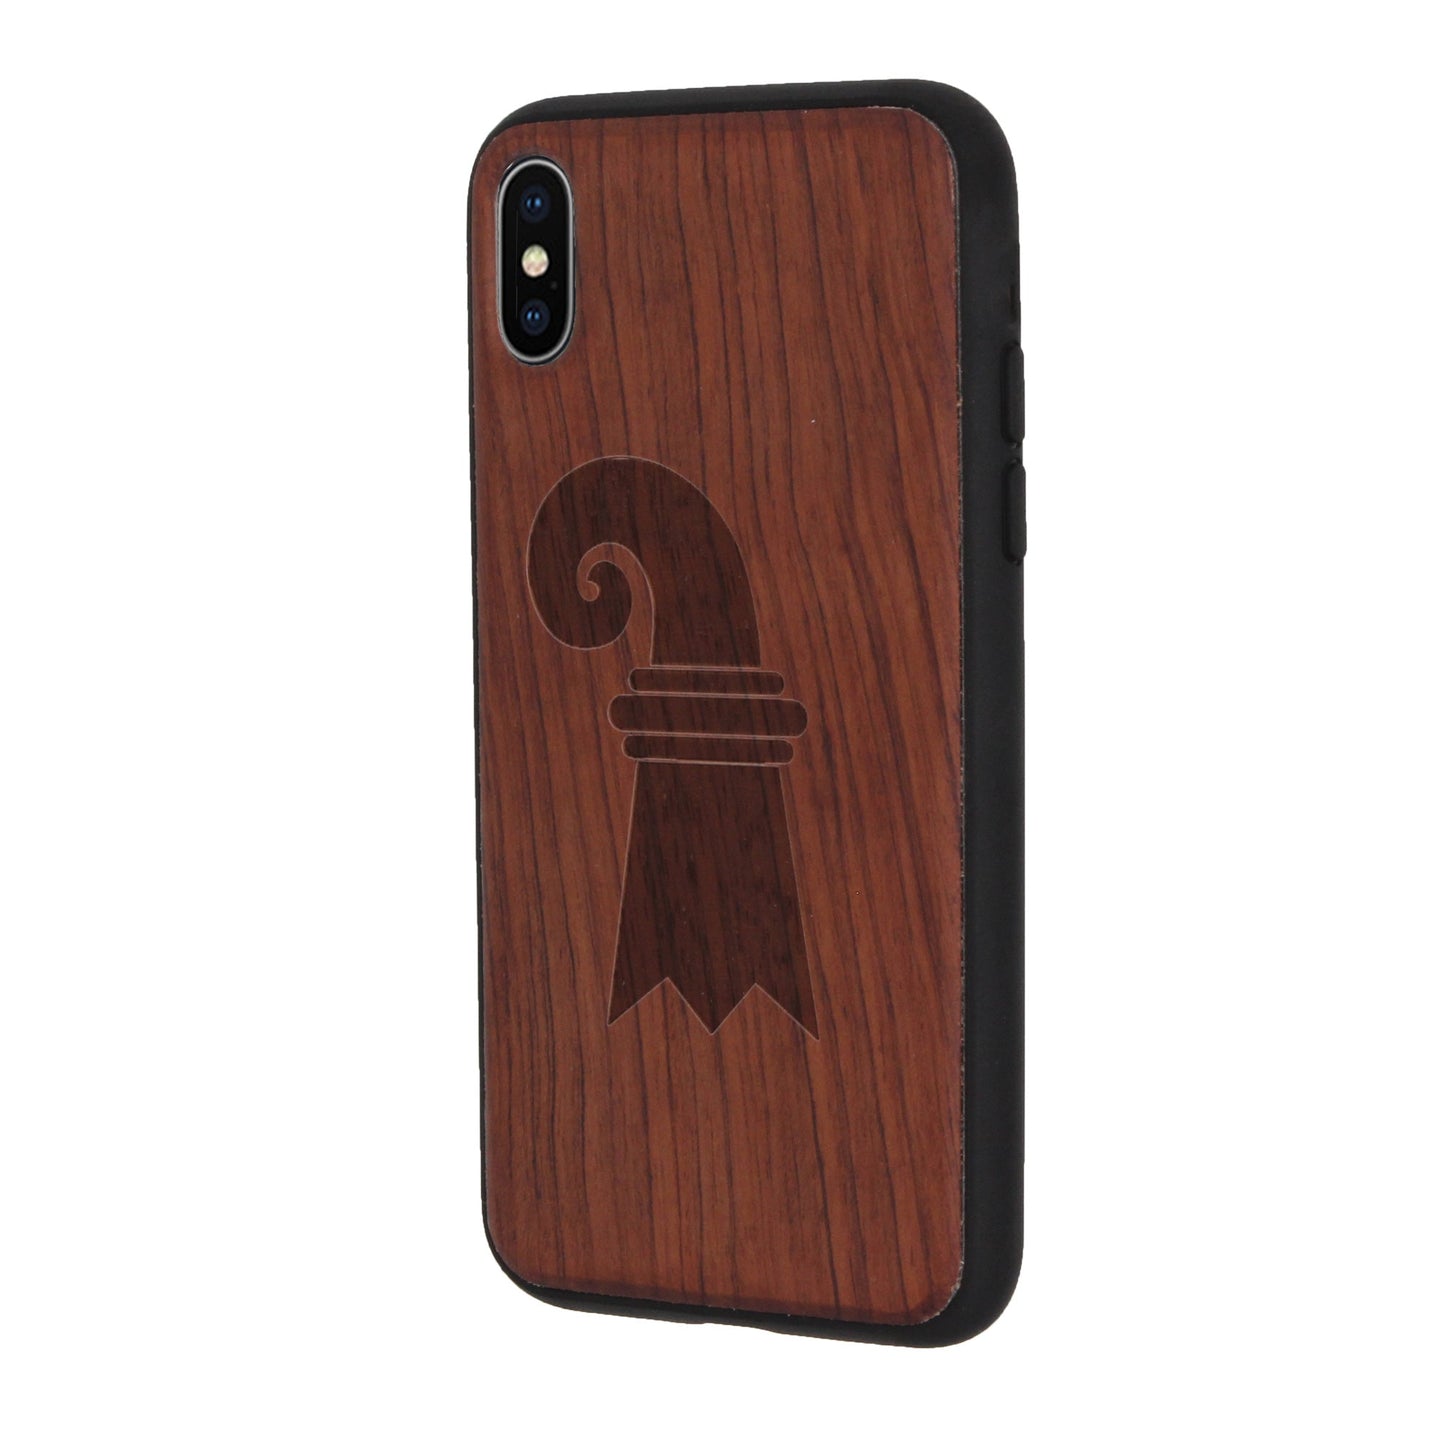 Baslerstab Eden case made of rosewood for iPhone X/XS